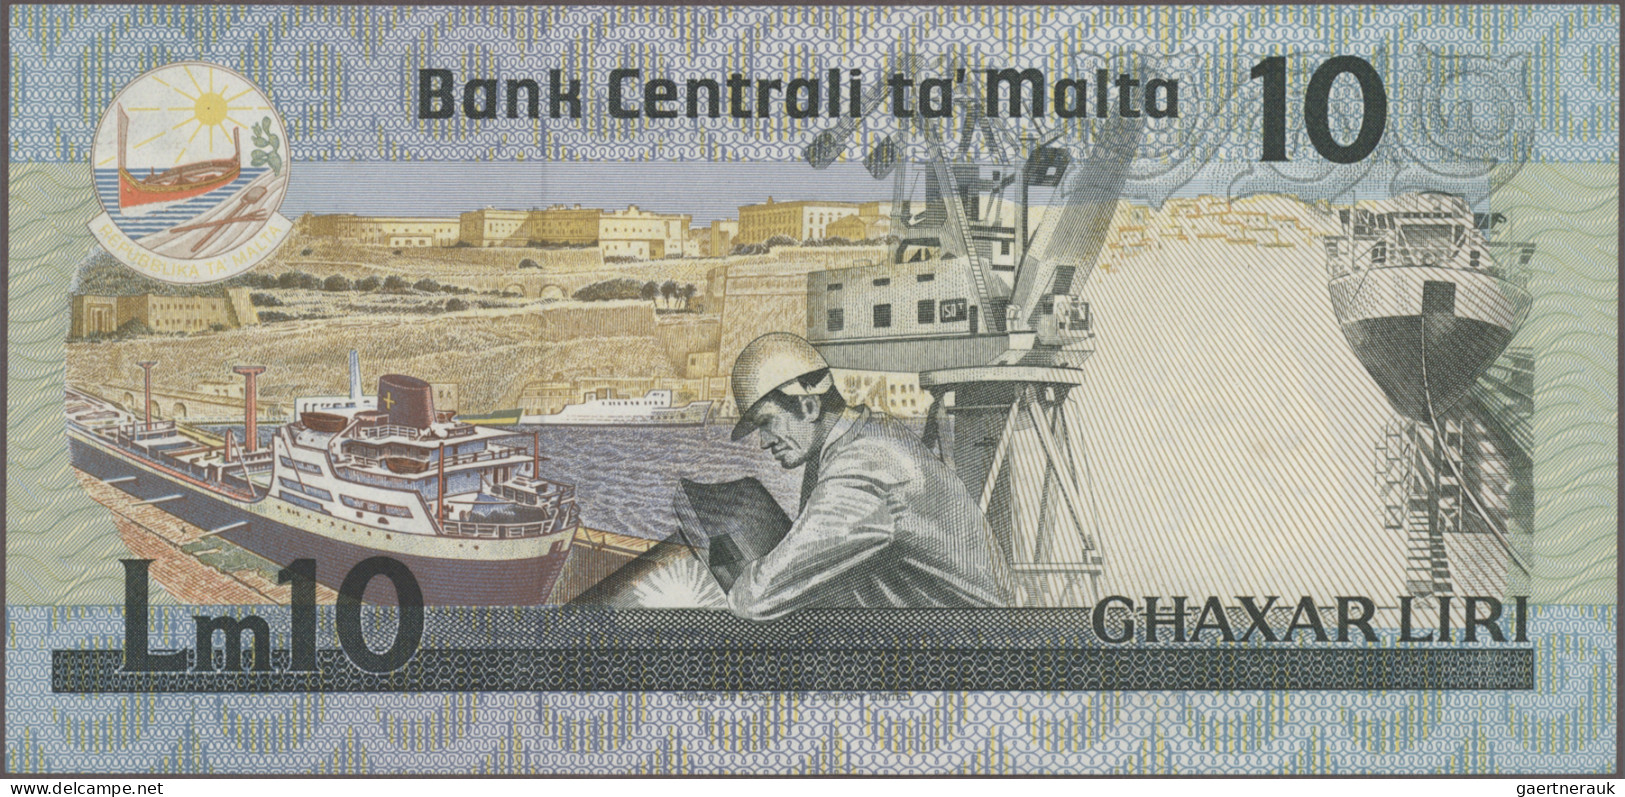 Malta: Central Bank Of Malta, Huge Lot With 11 Banknotes, Series 1973-2003, With - Malte